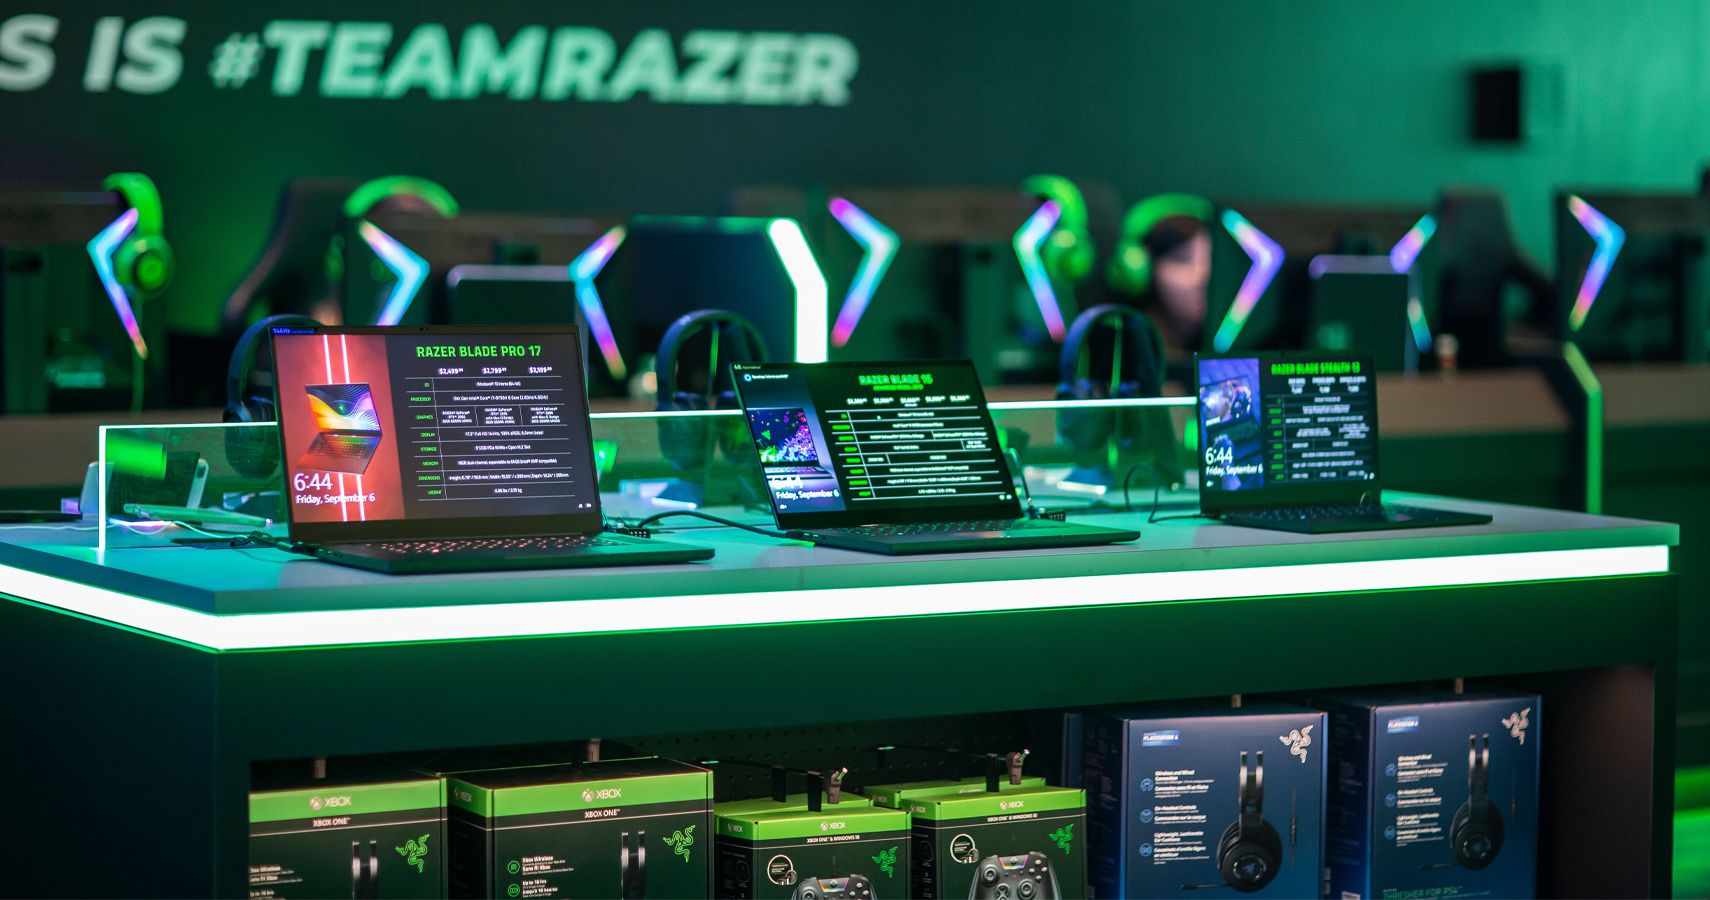 Razers New Brick & Mortar Store Is The Stuff Of Gamers Wildest Dreams